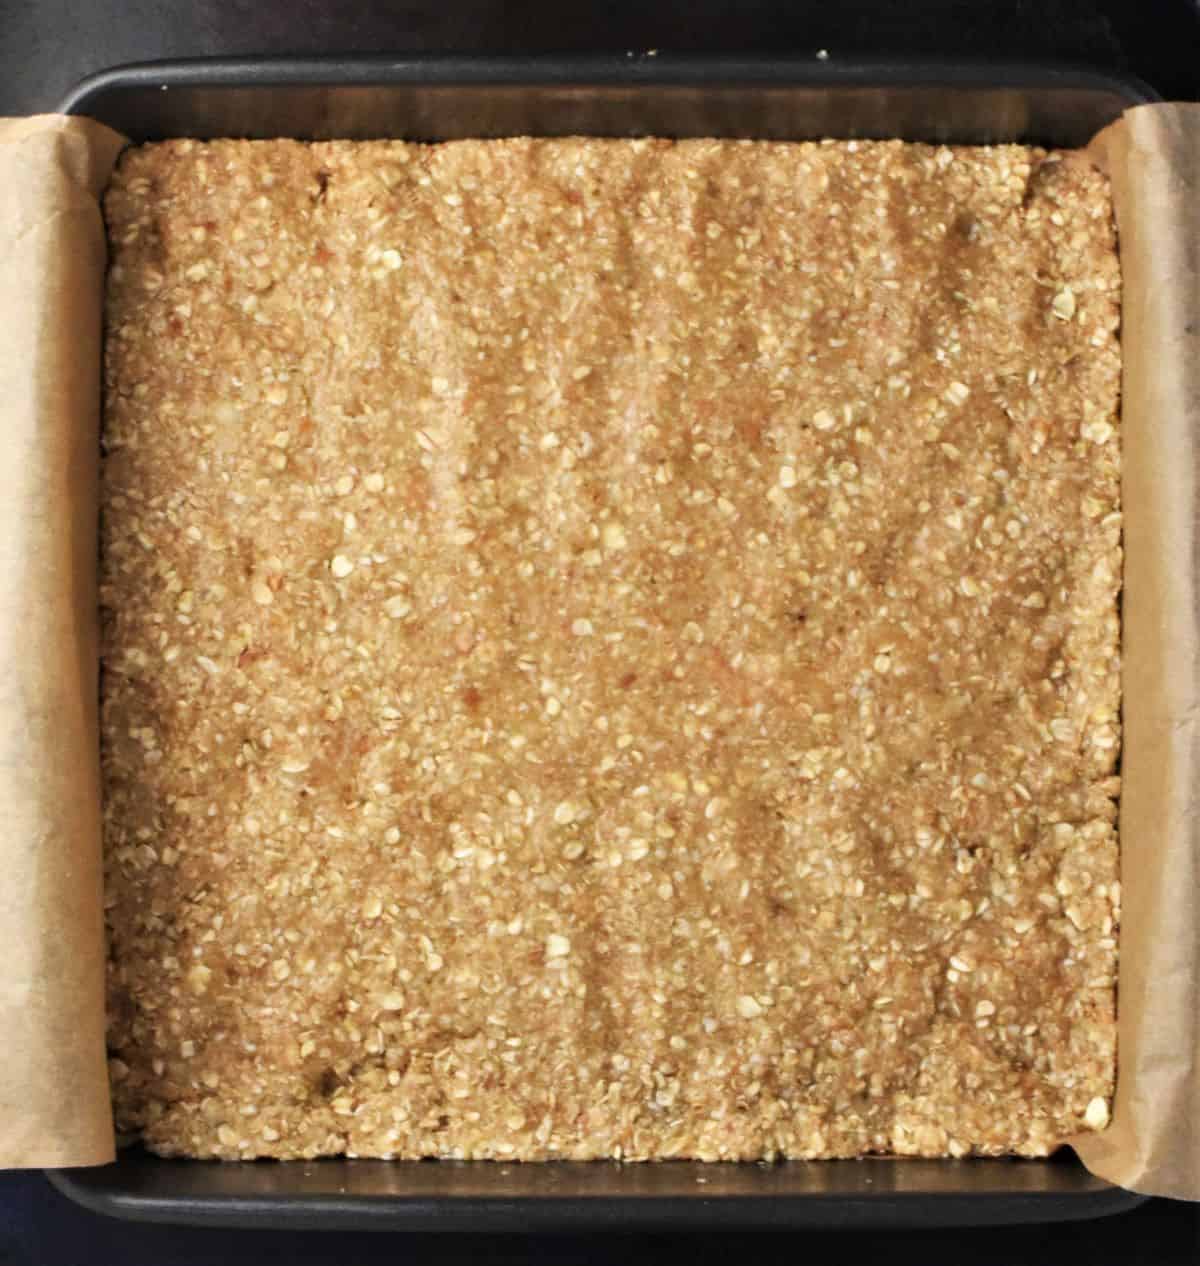 Top down view of oatmeal bars base in square pan.